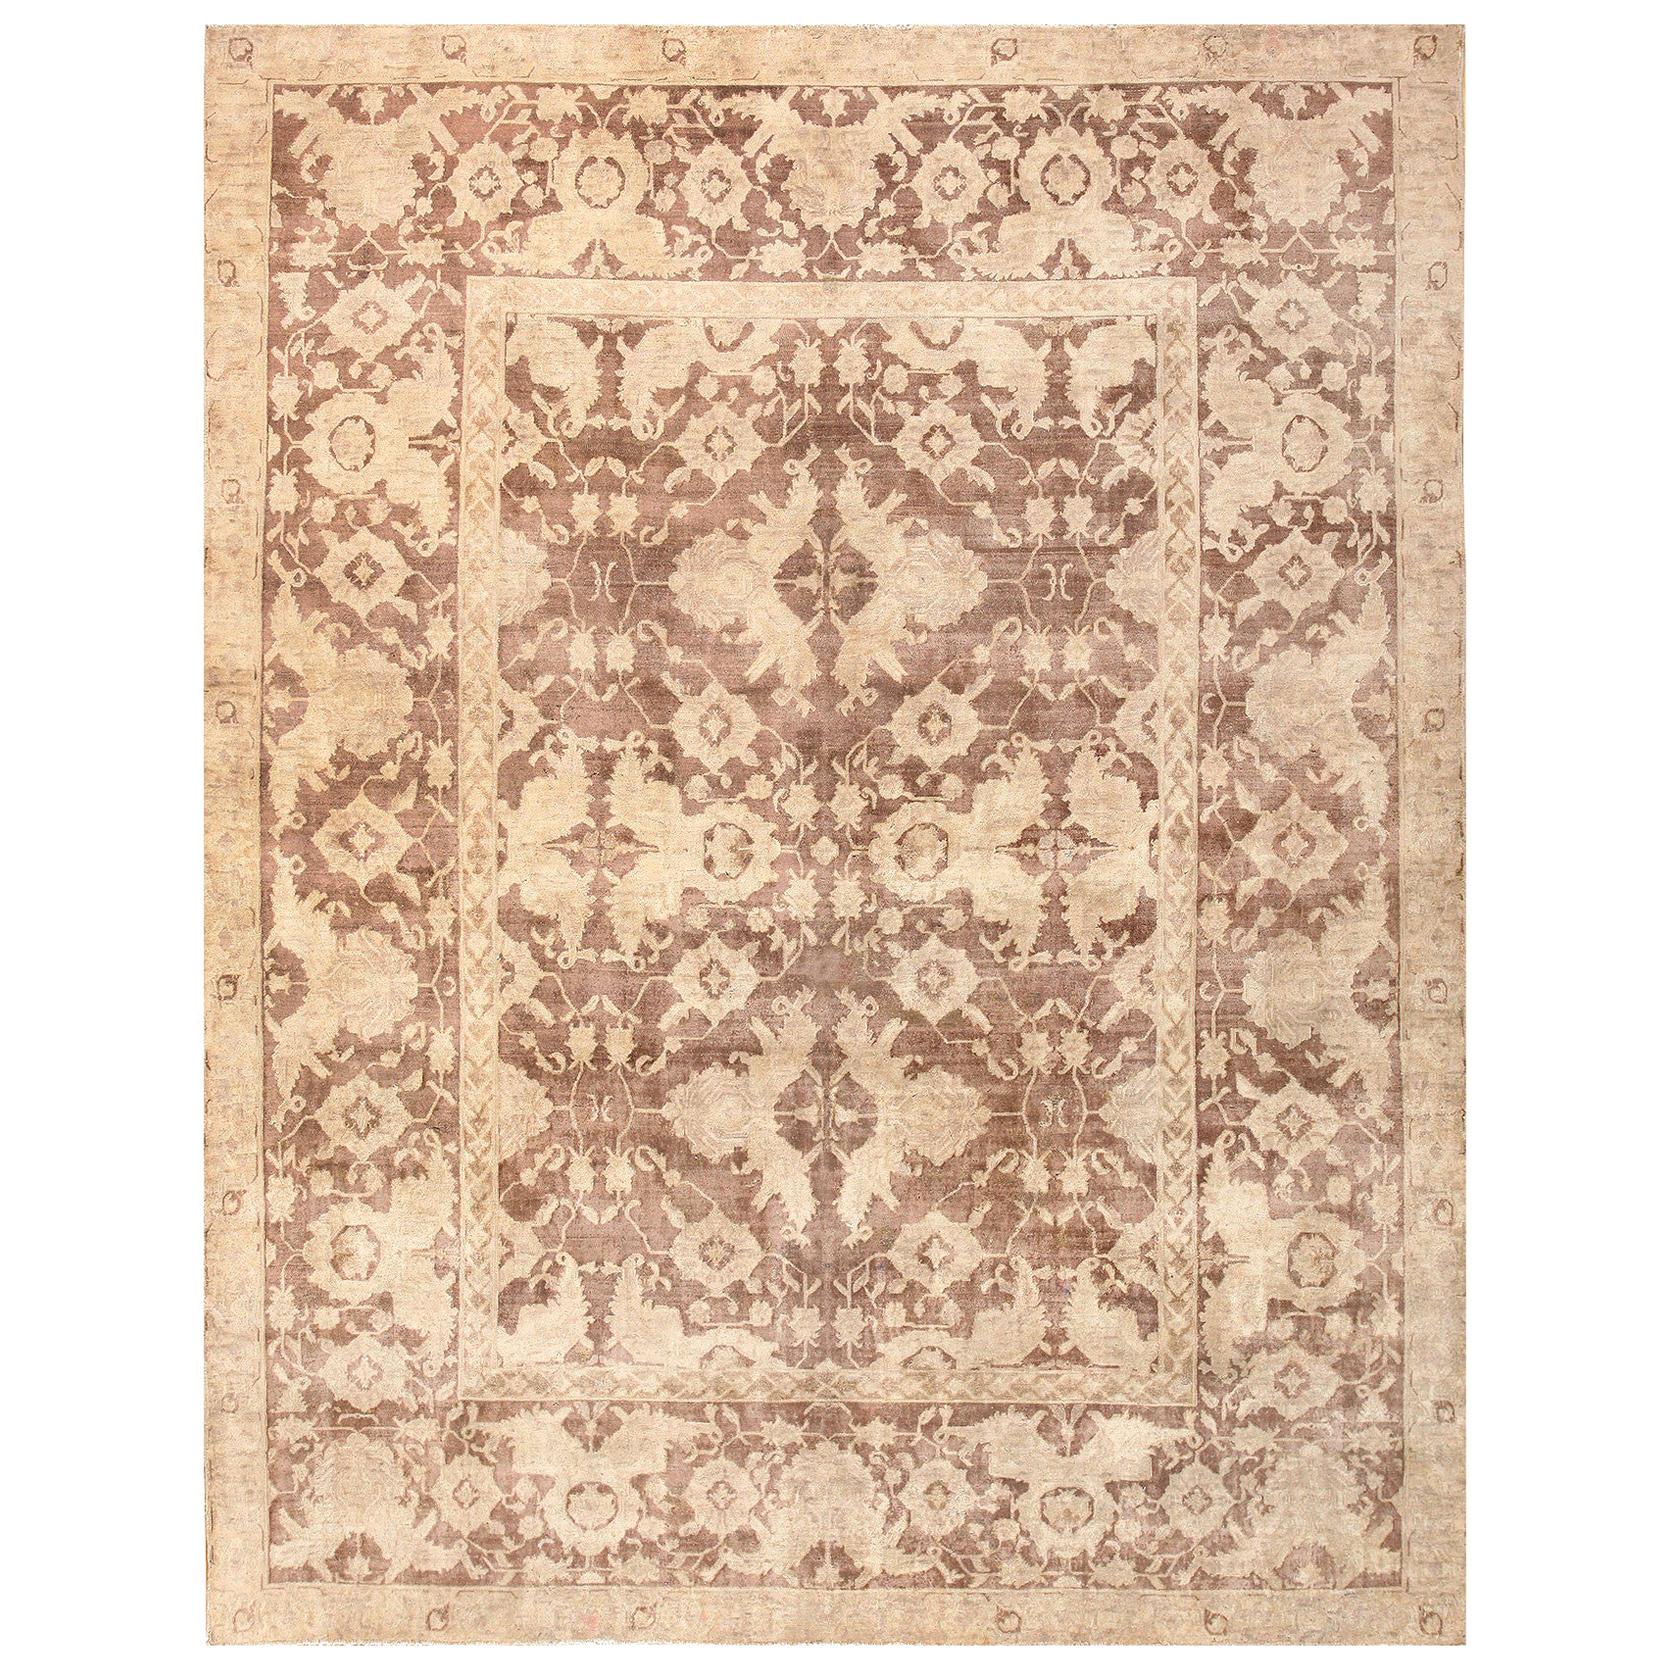 Nazmiyal Collection Antique Room Sized Indian Agra Rug. 9 ft 2 in x 11 ft 8 in